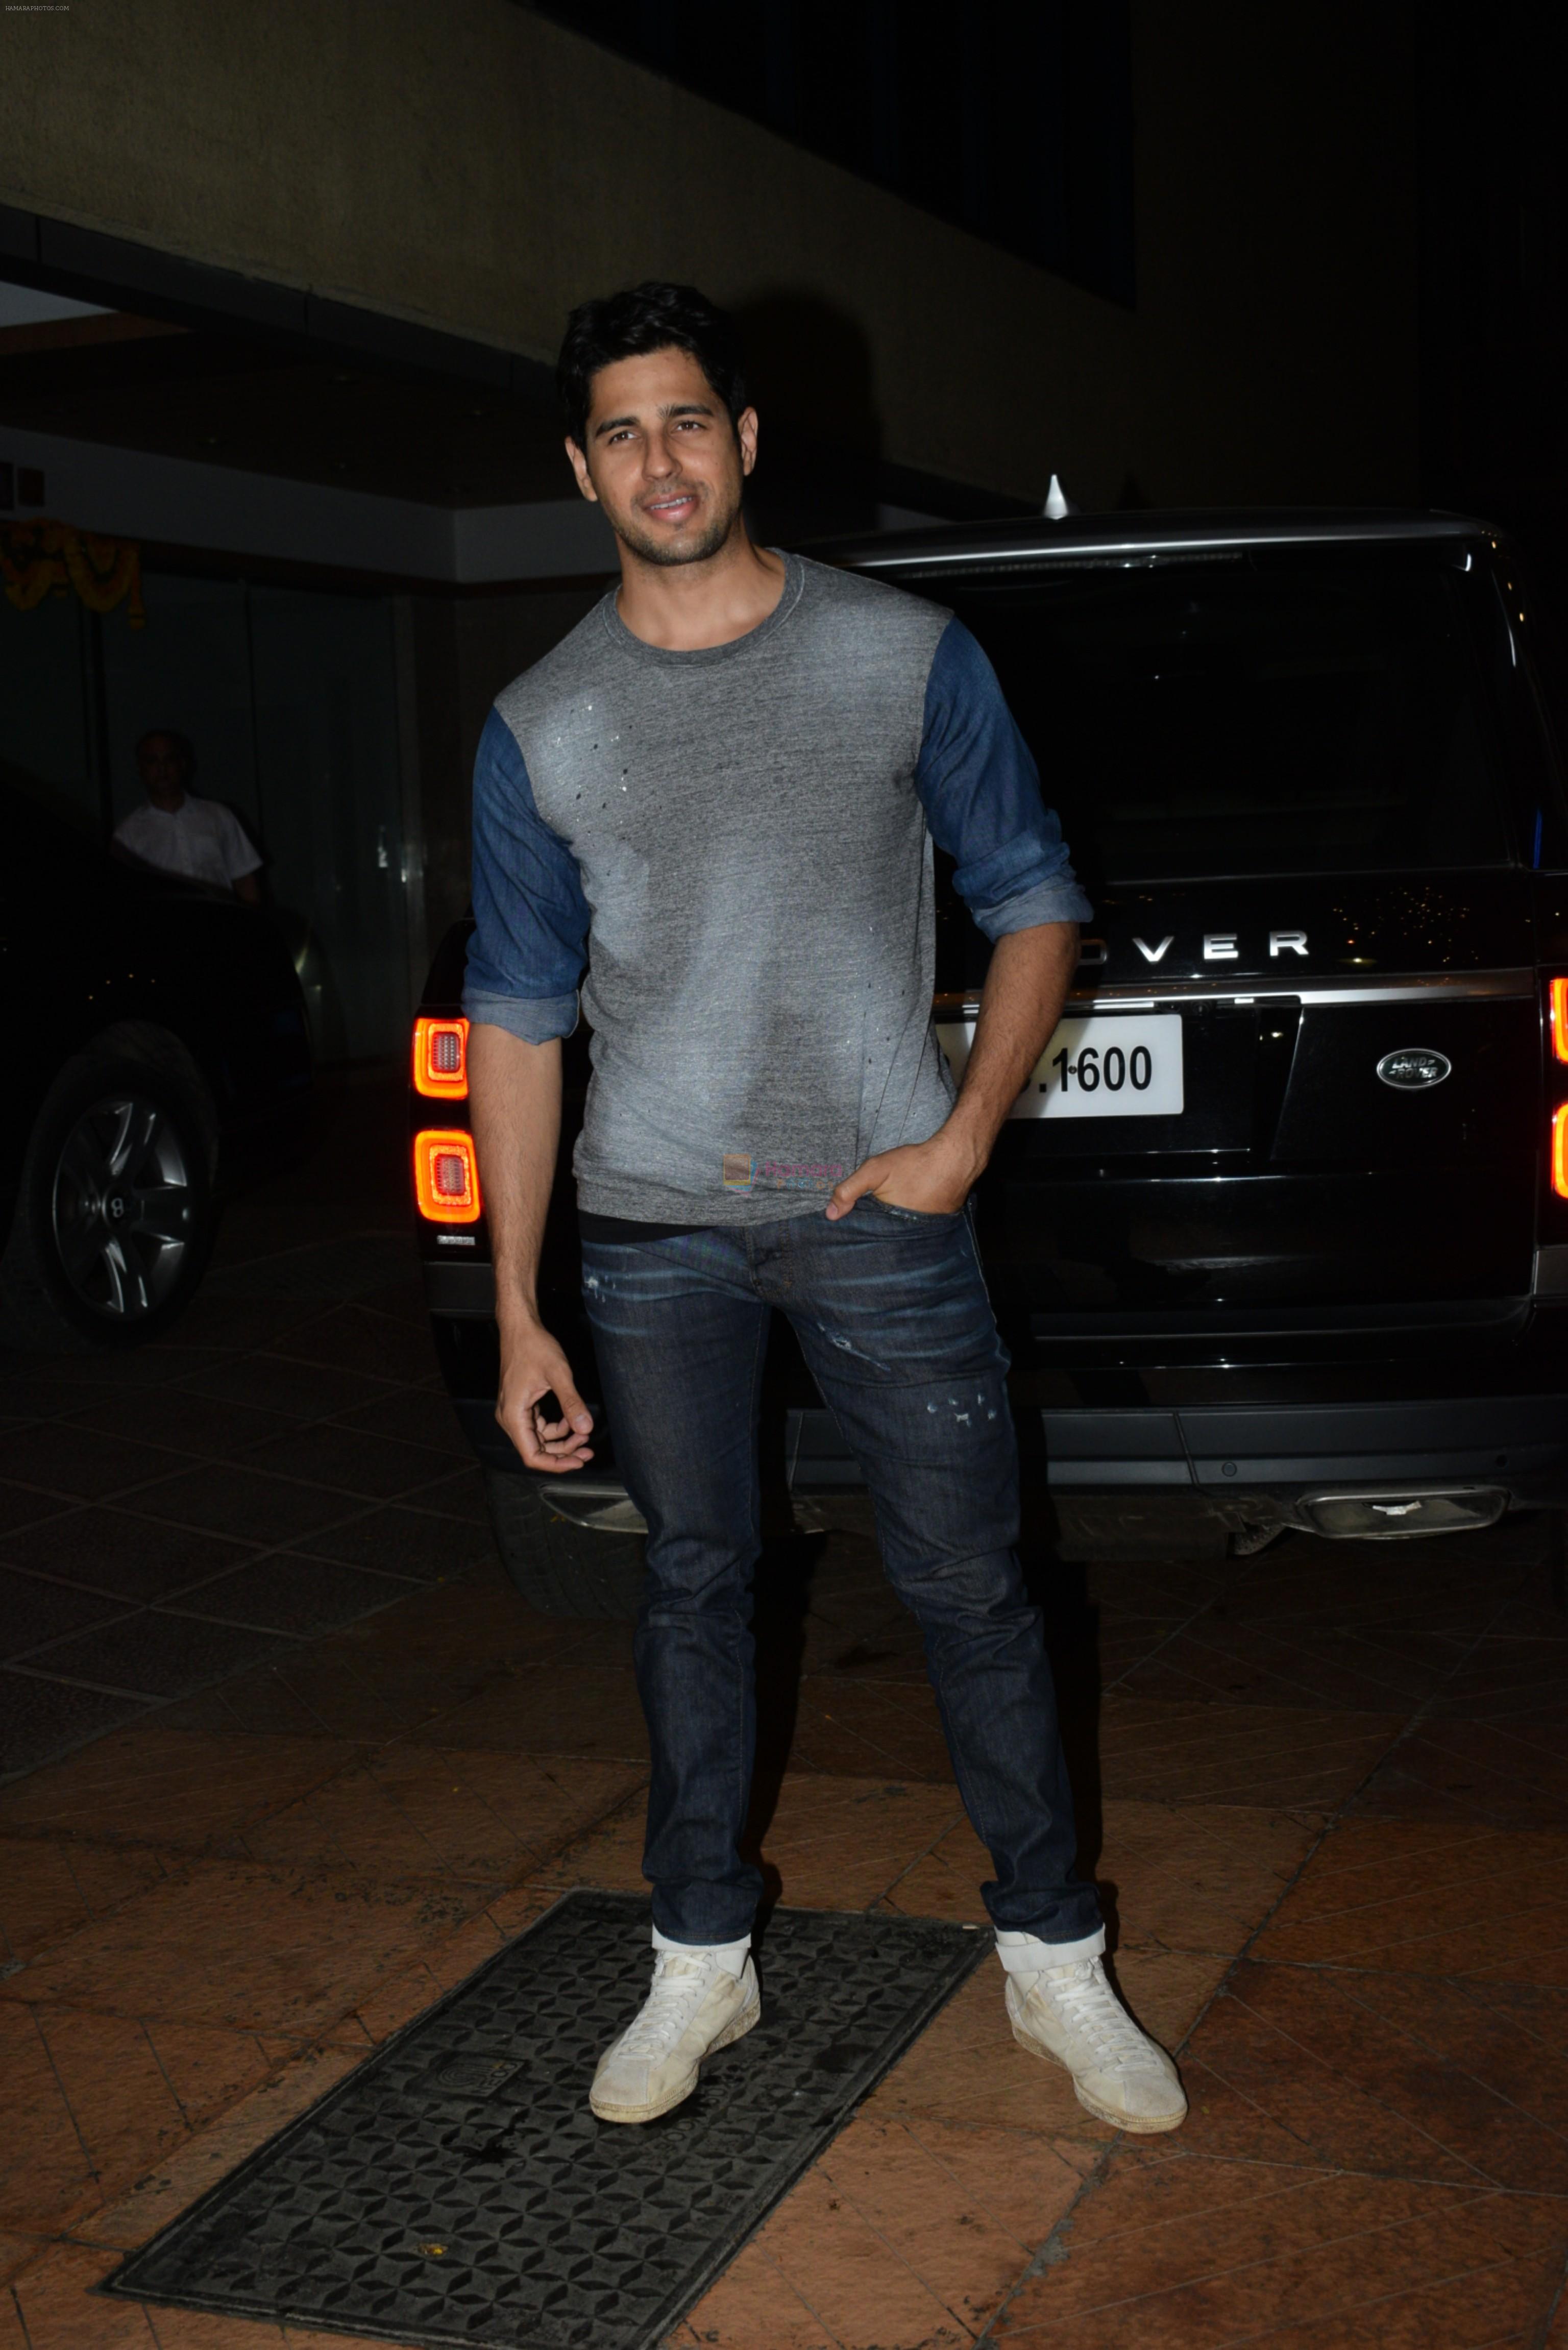 Sidharth Malhotra at Ekta Kapoor's birthday party at her residence in juhu on 9th June 2019